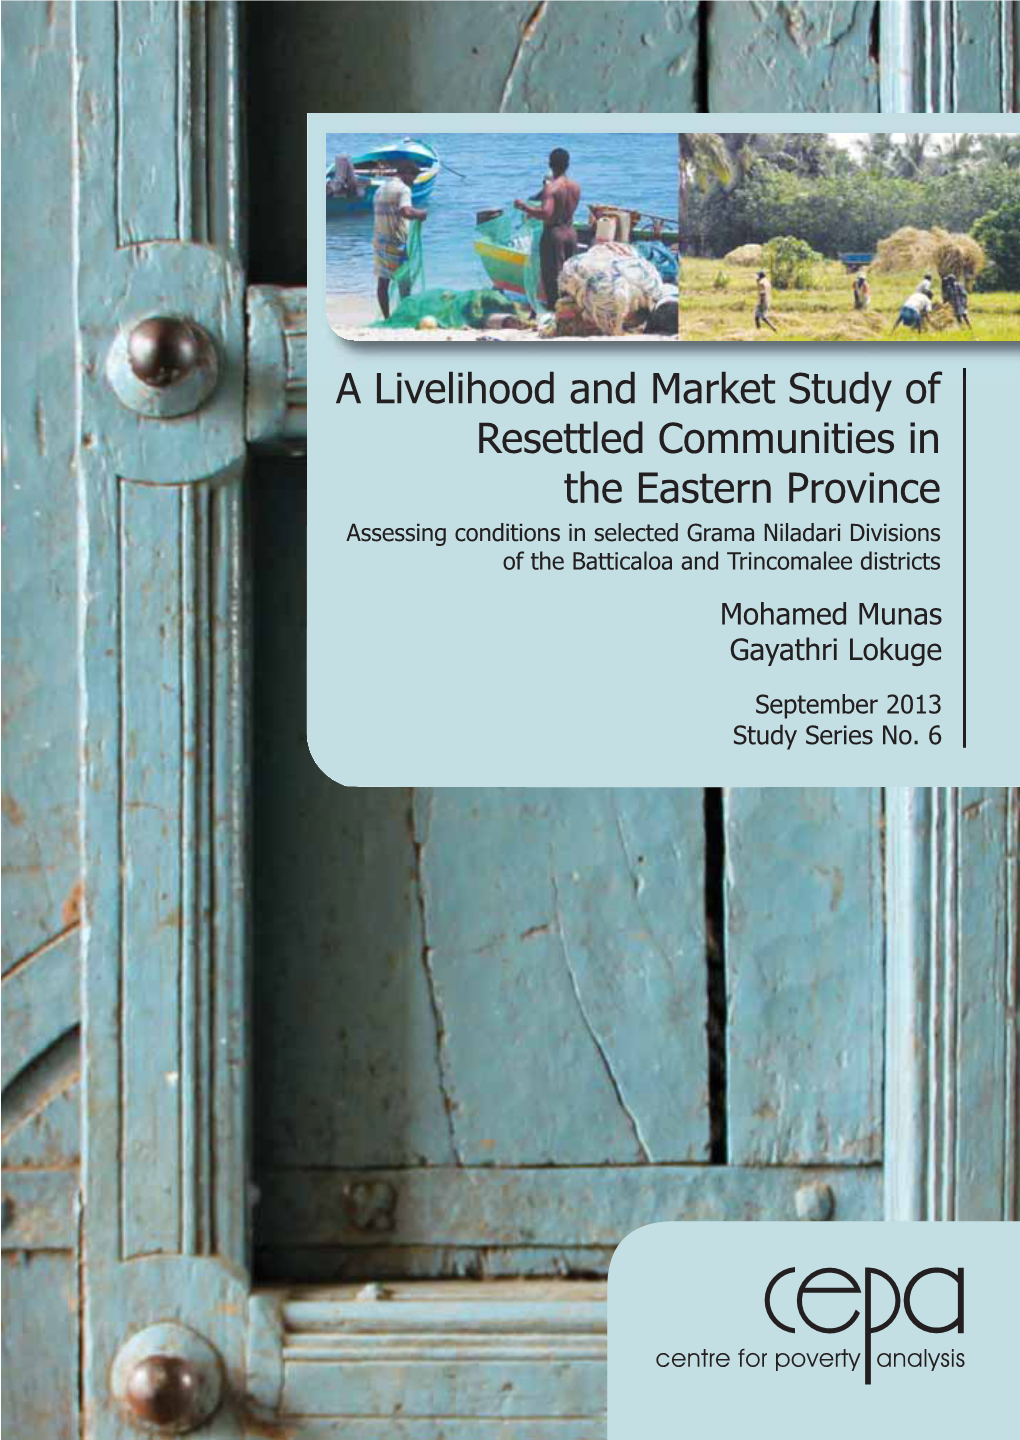 A Livelihood and Market Study of Resettled Communities in The